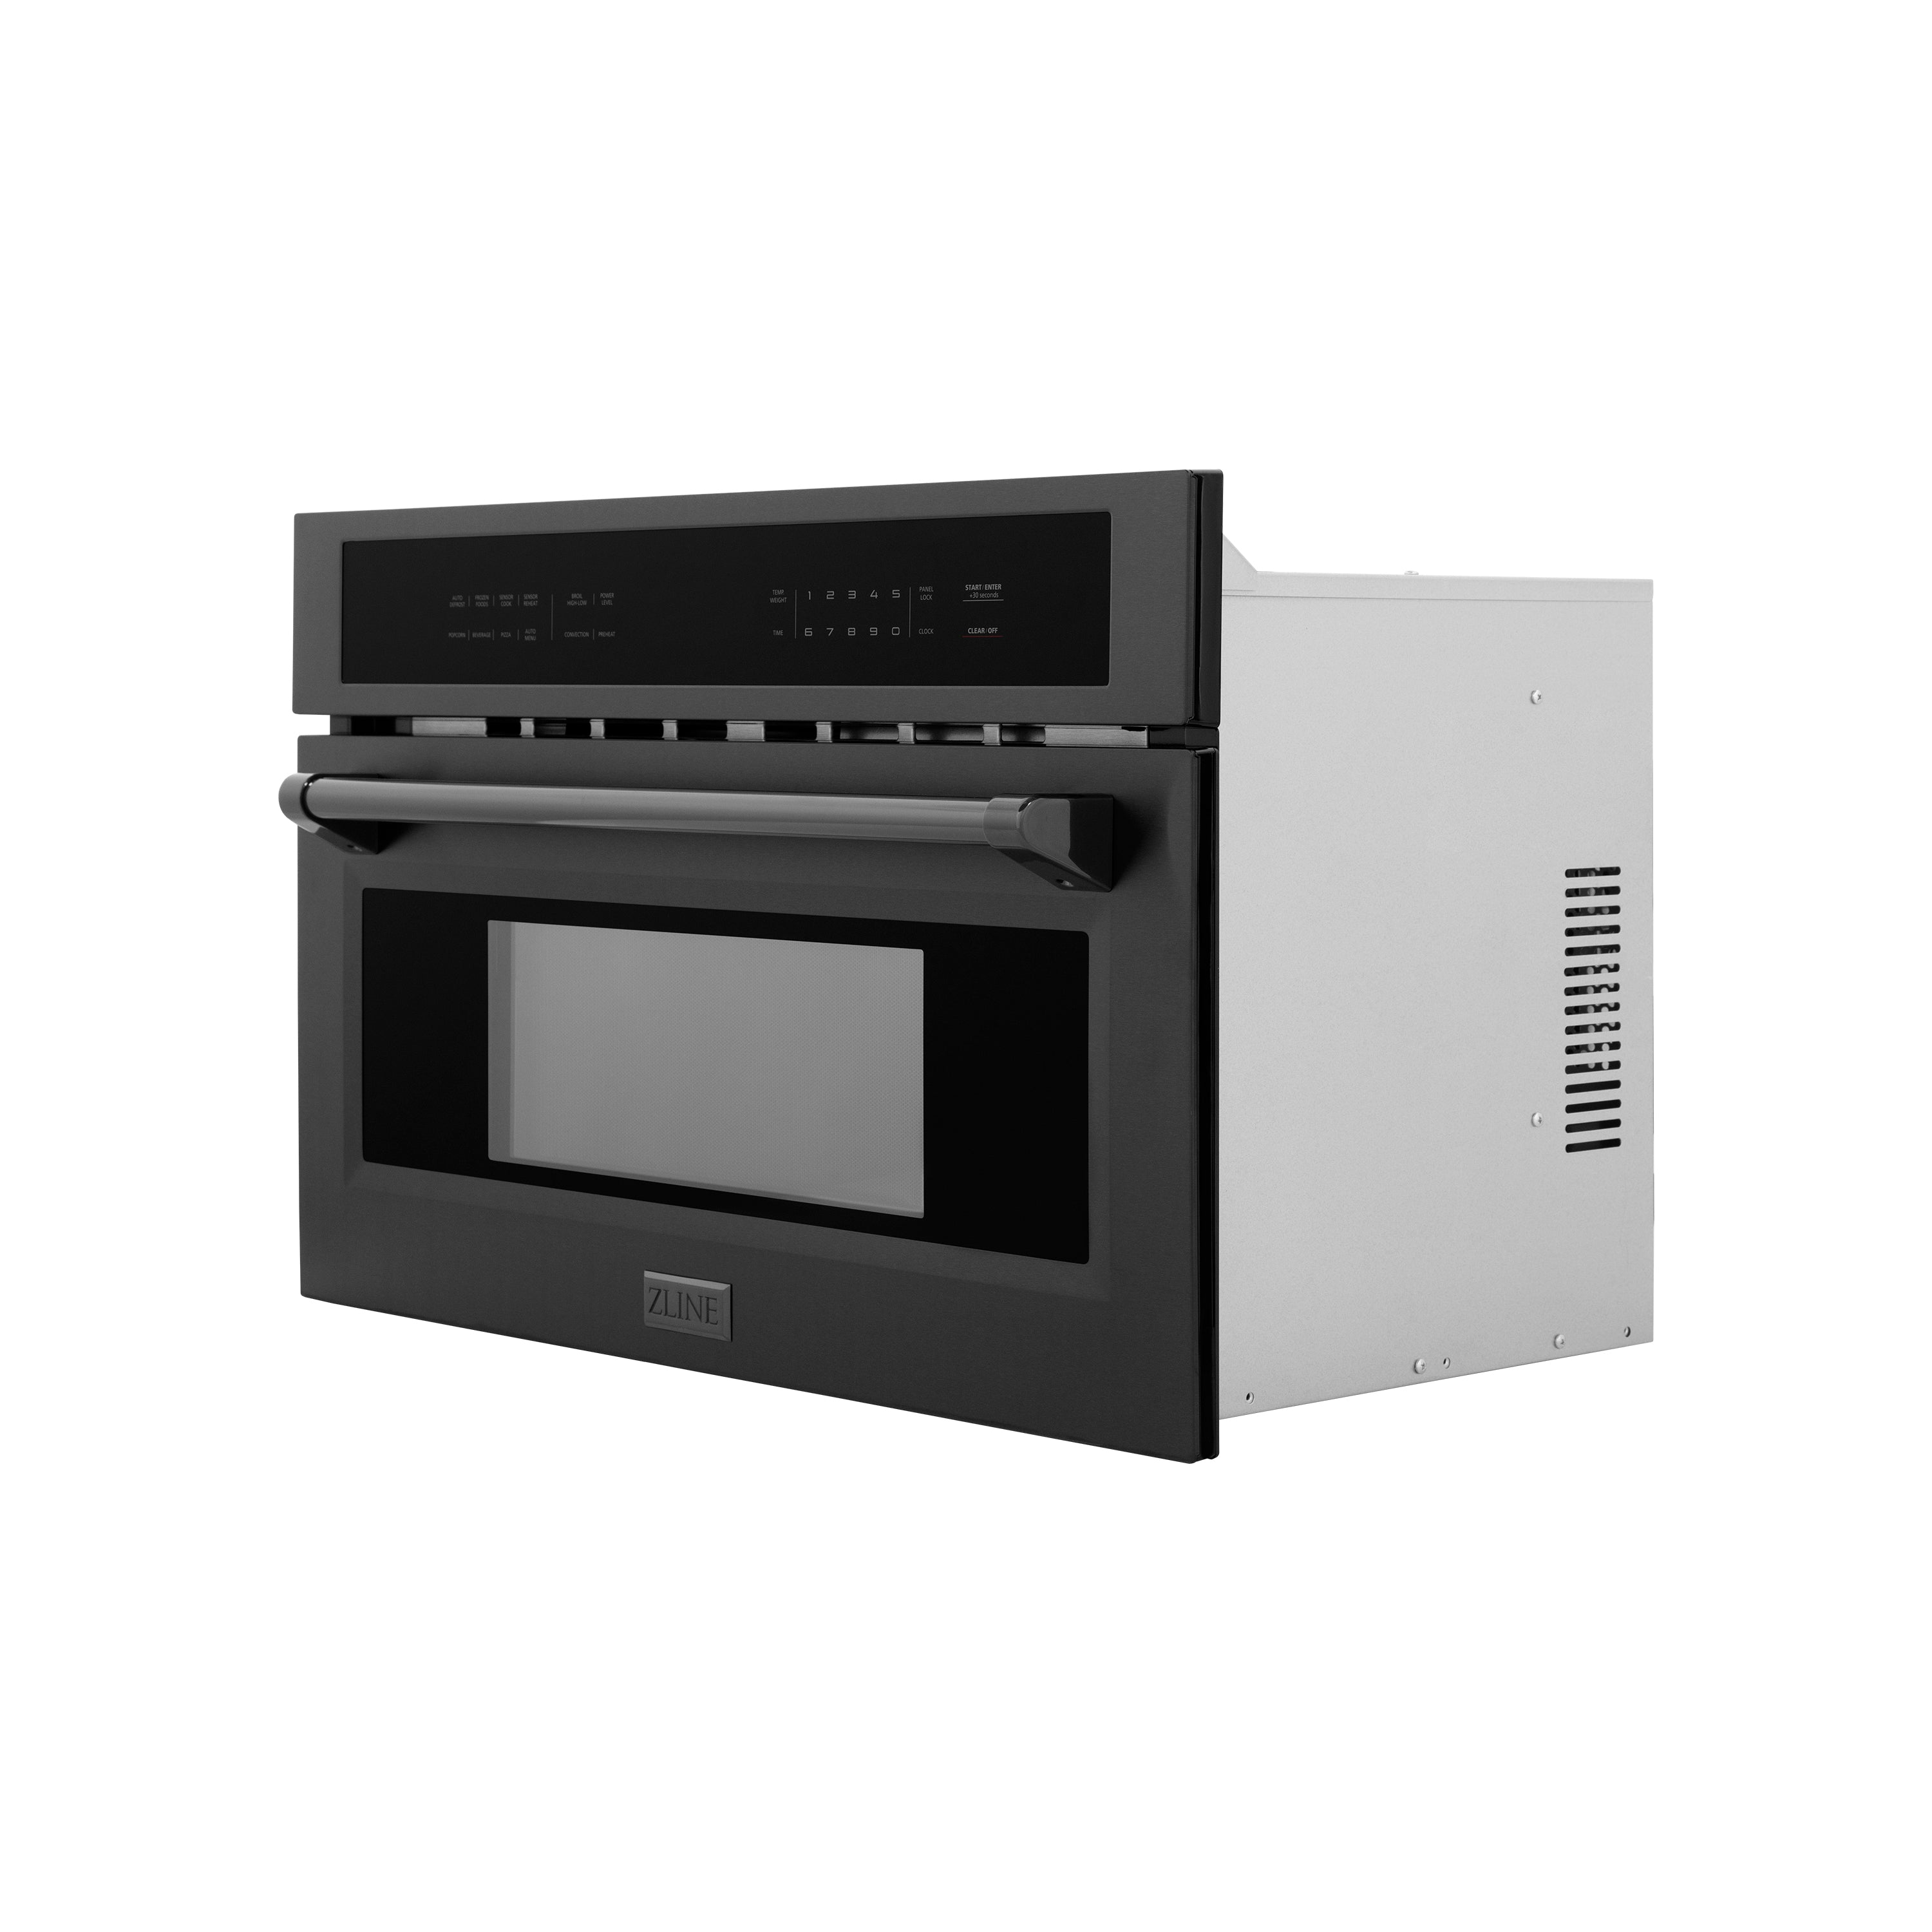 ZLINE 30” 1.6 cu ft. Built-in Convection Microwave Oven in Black Stainless Steel with Speed and Sensor Cooking